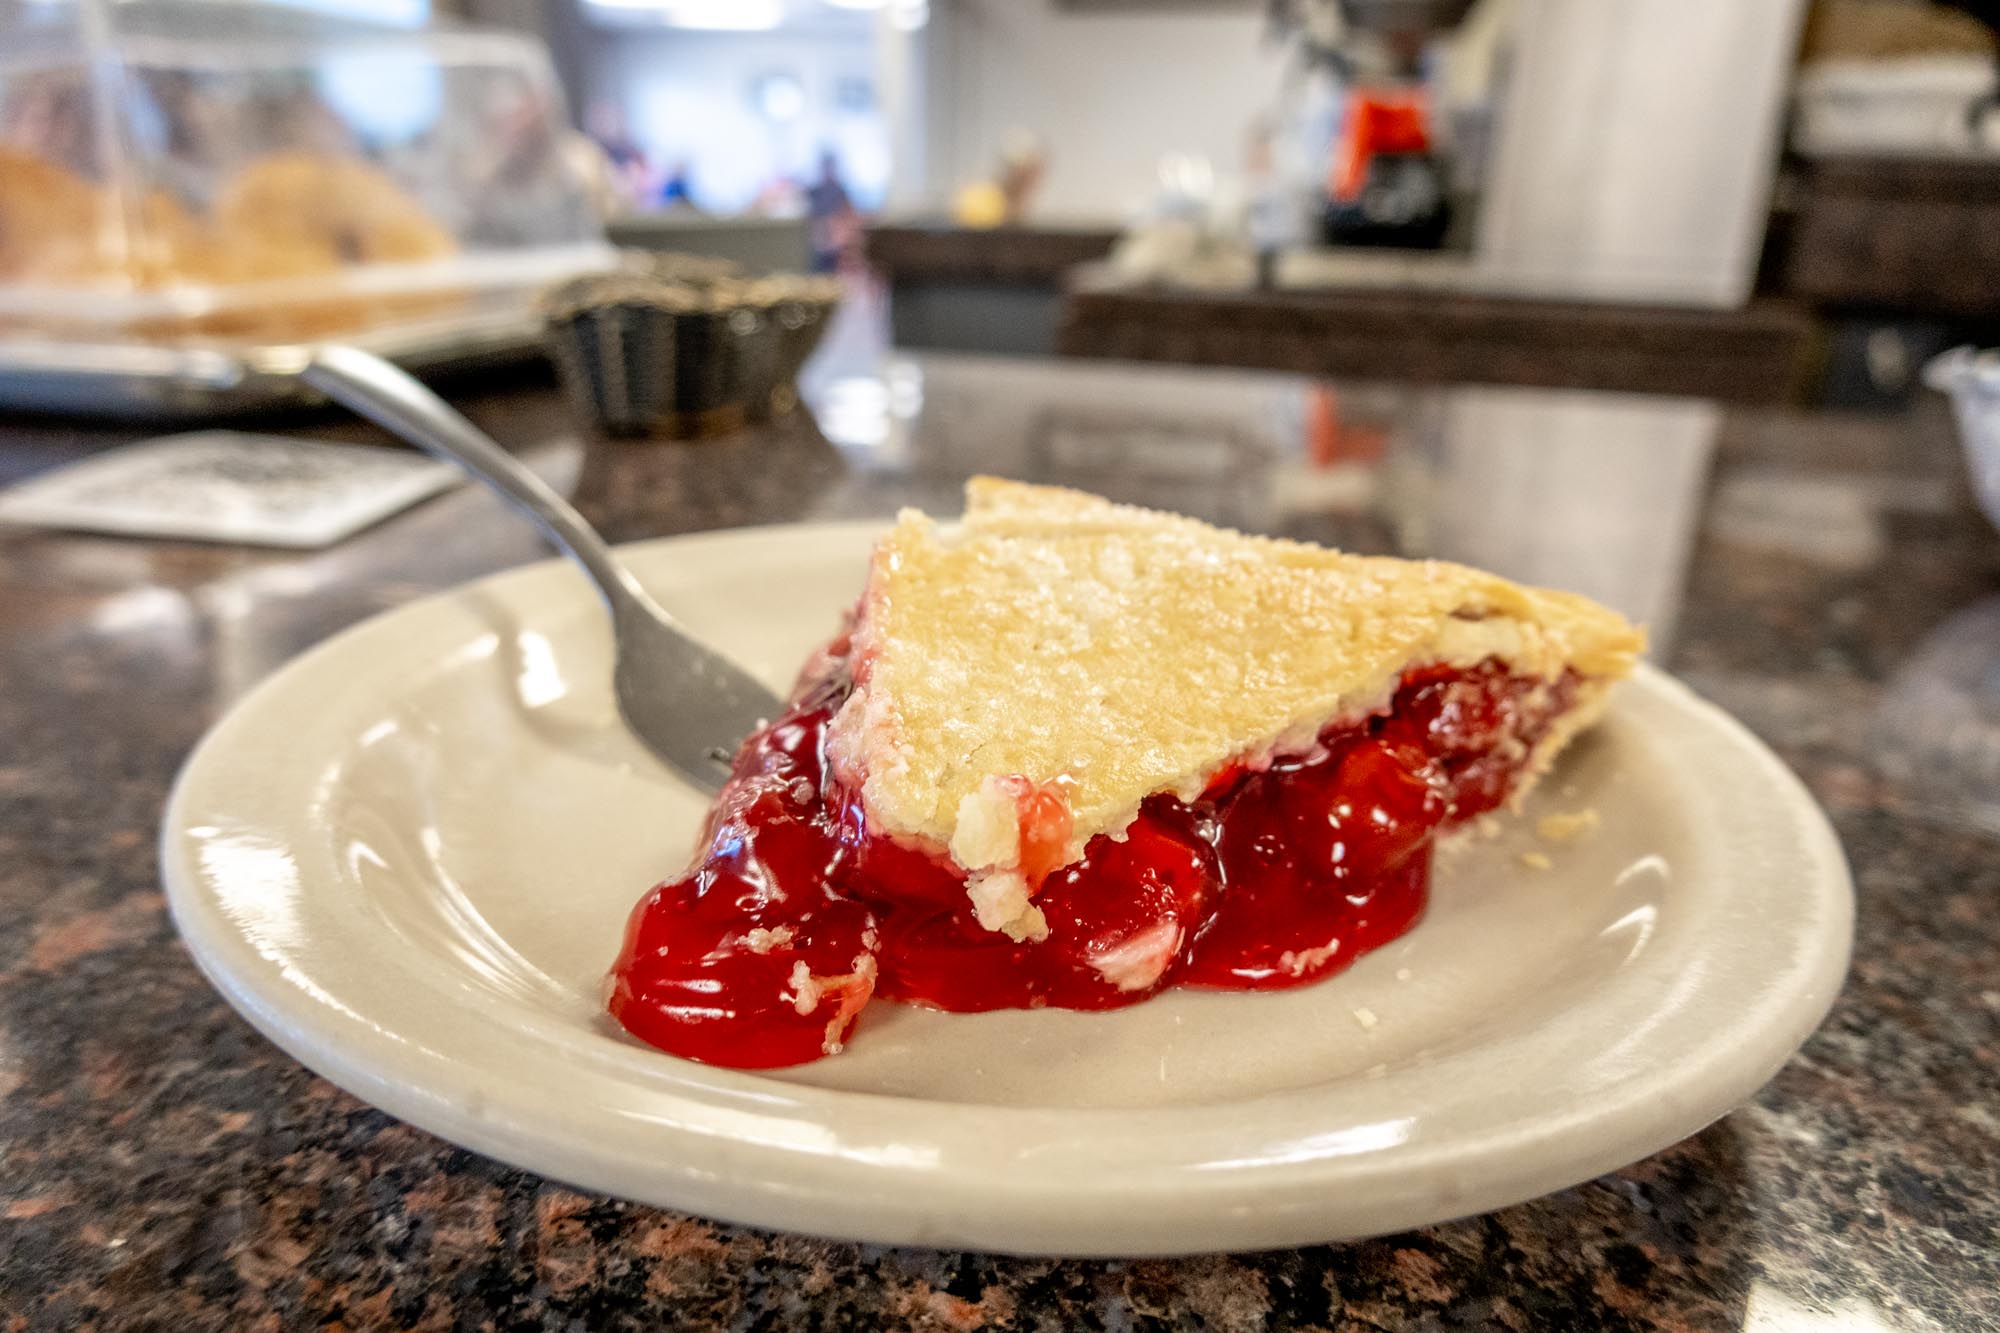 Slice of cherry pie on a plate.